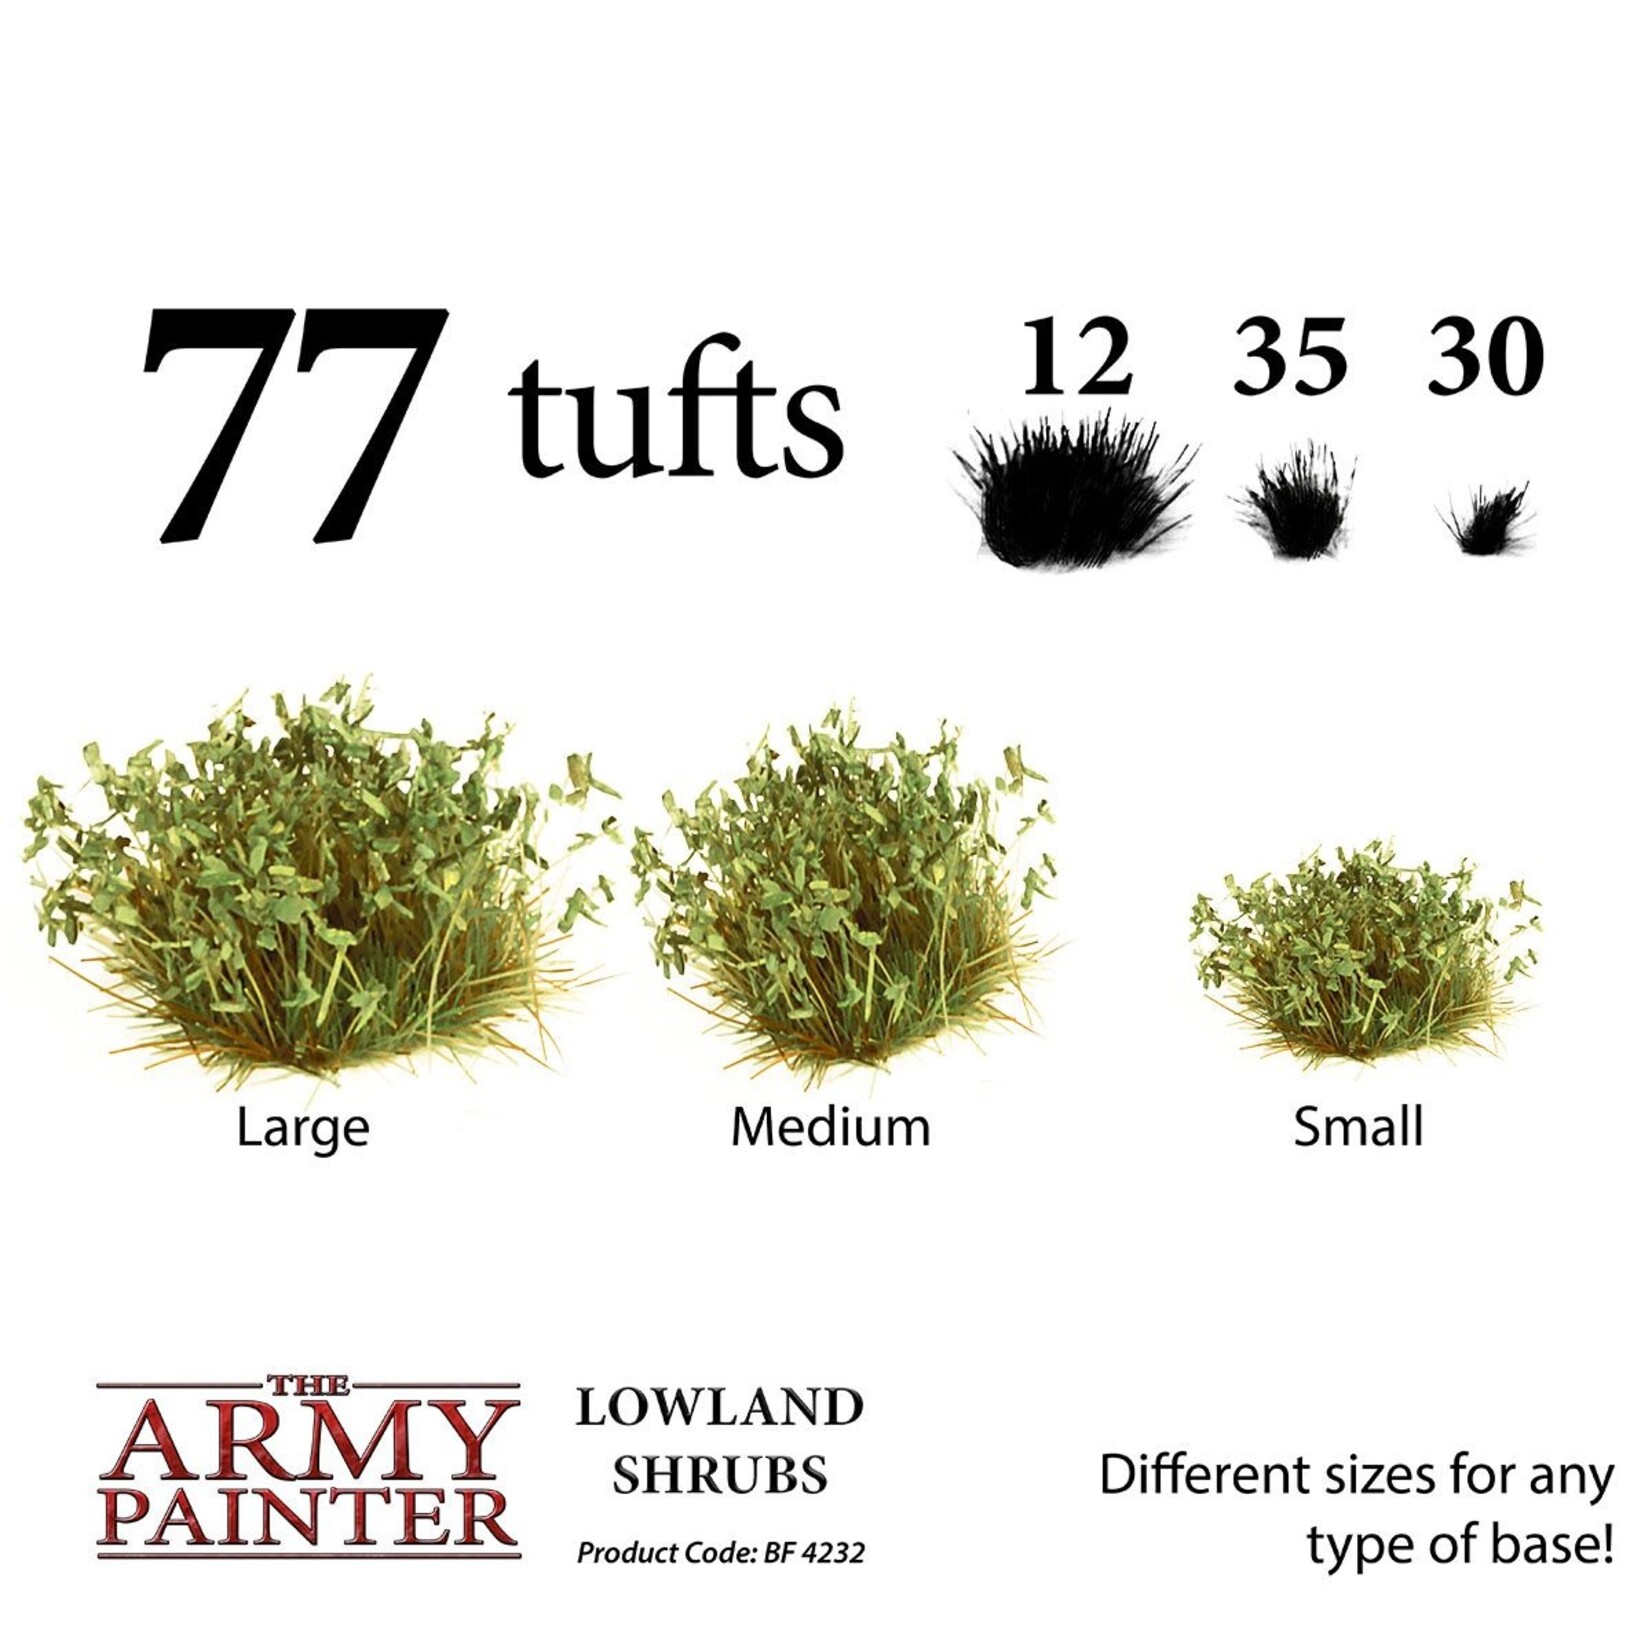 the army painter The Army Painter: 77 Tufts - Lowland Shrubs